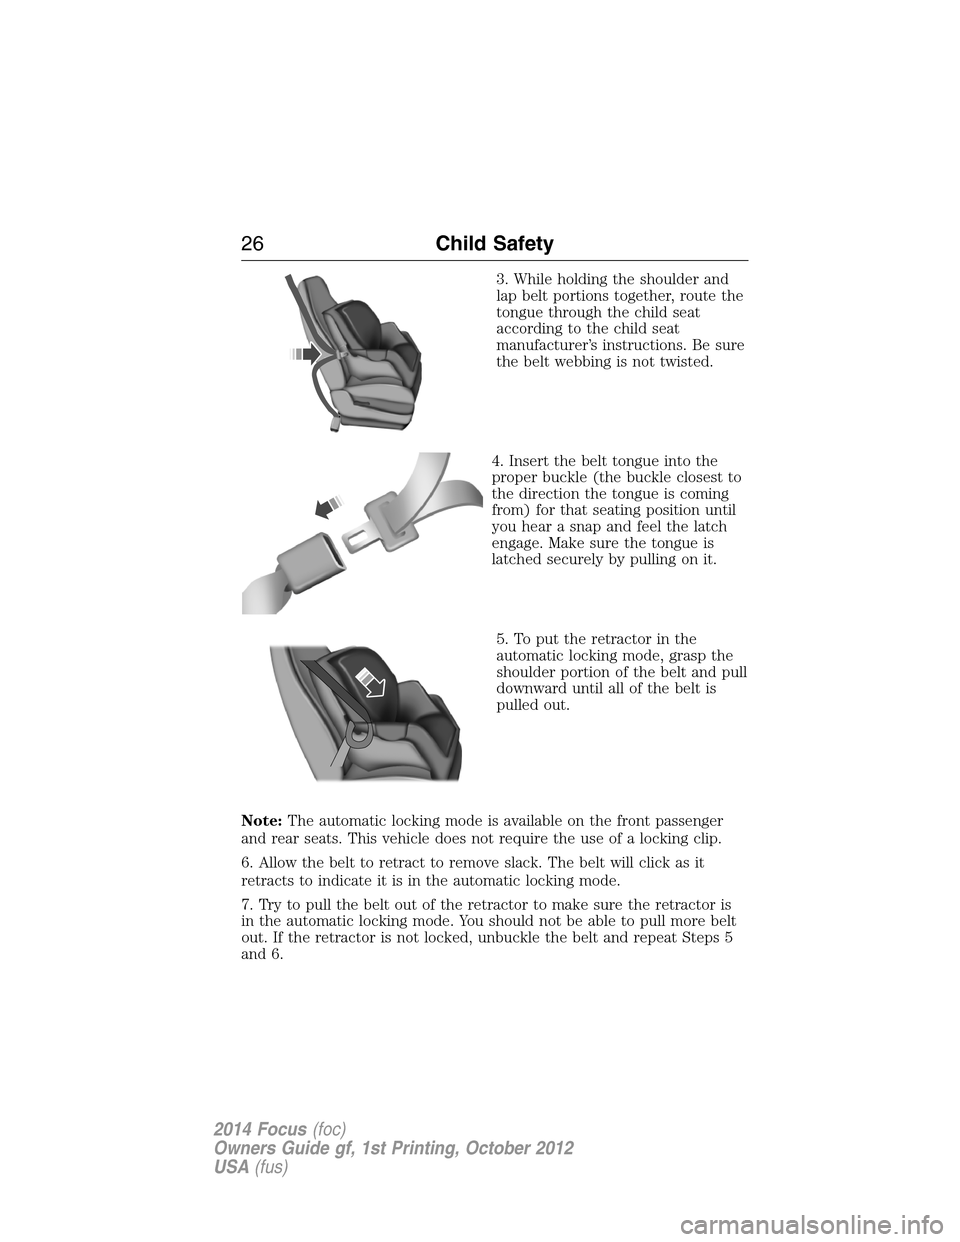 FORD FOCUS 2014 3.G User Guide 3. While holding the shoulder and
lap belt portions together, route the
tongue through the child seat
according to the child seat
manufacturer’s instructions. Be sure
the belt webbing is not twisted